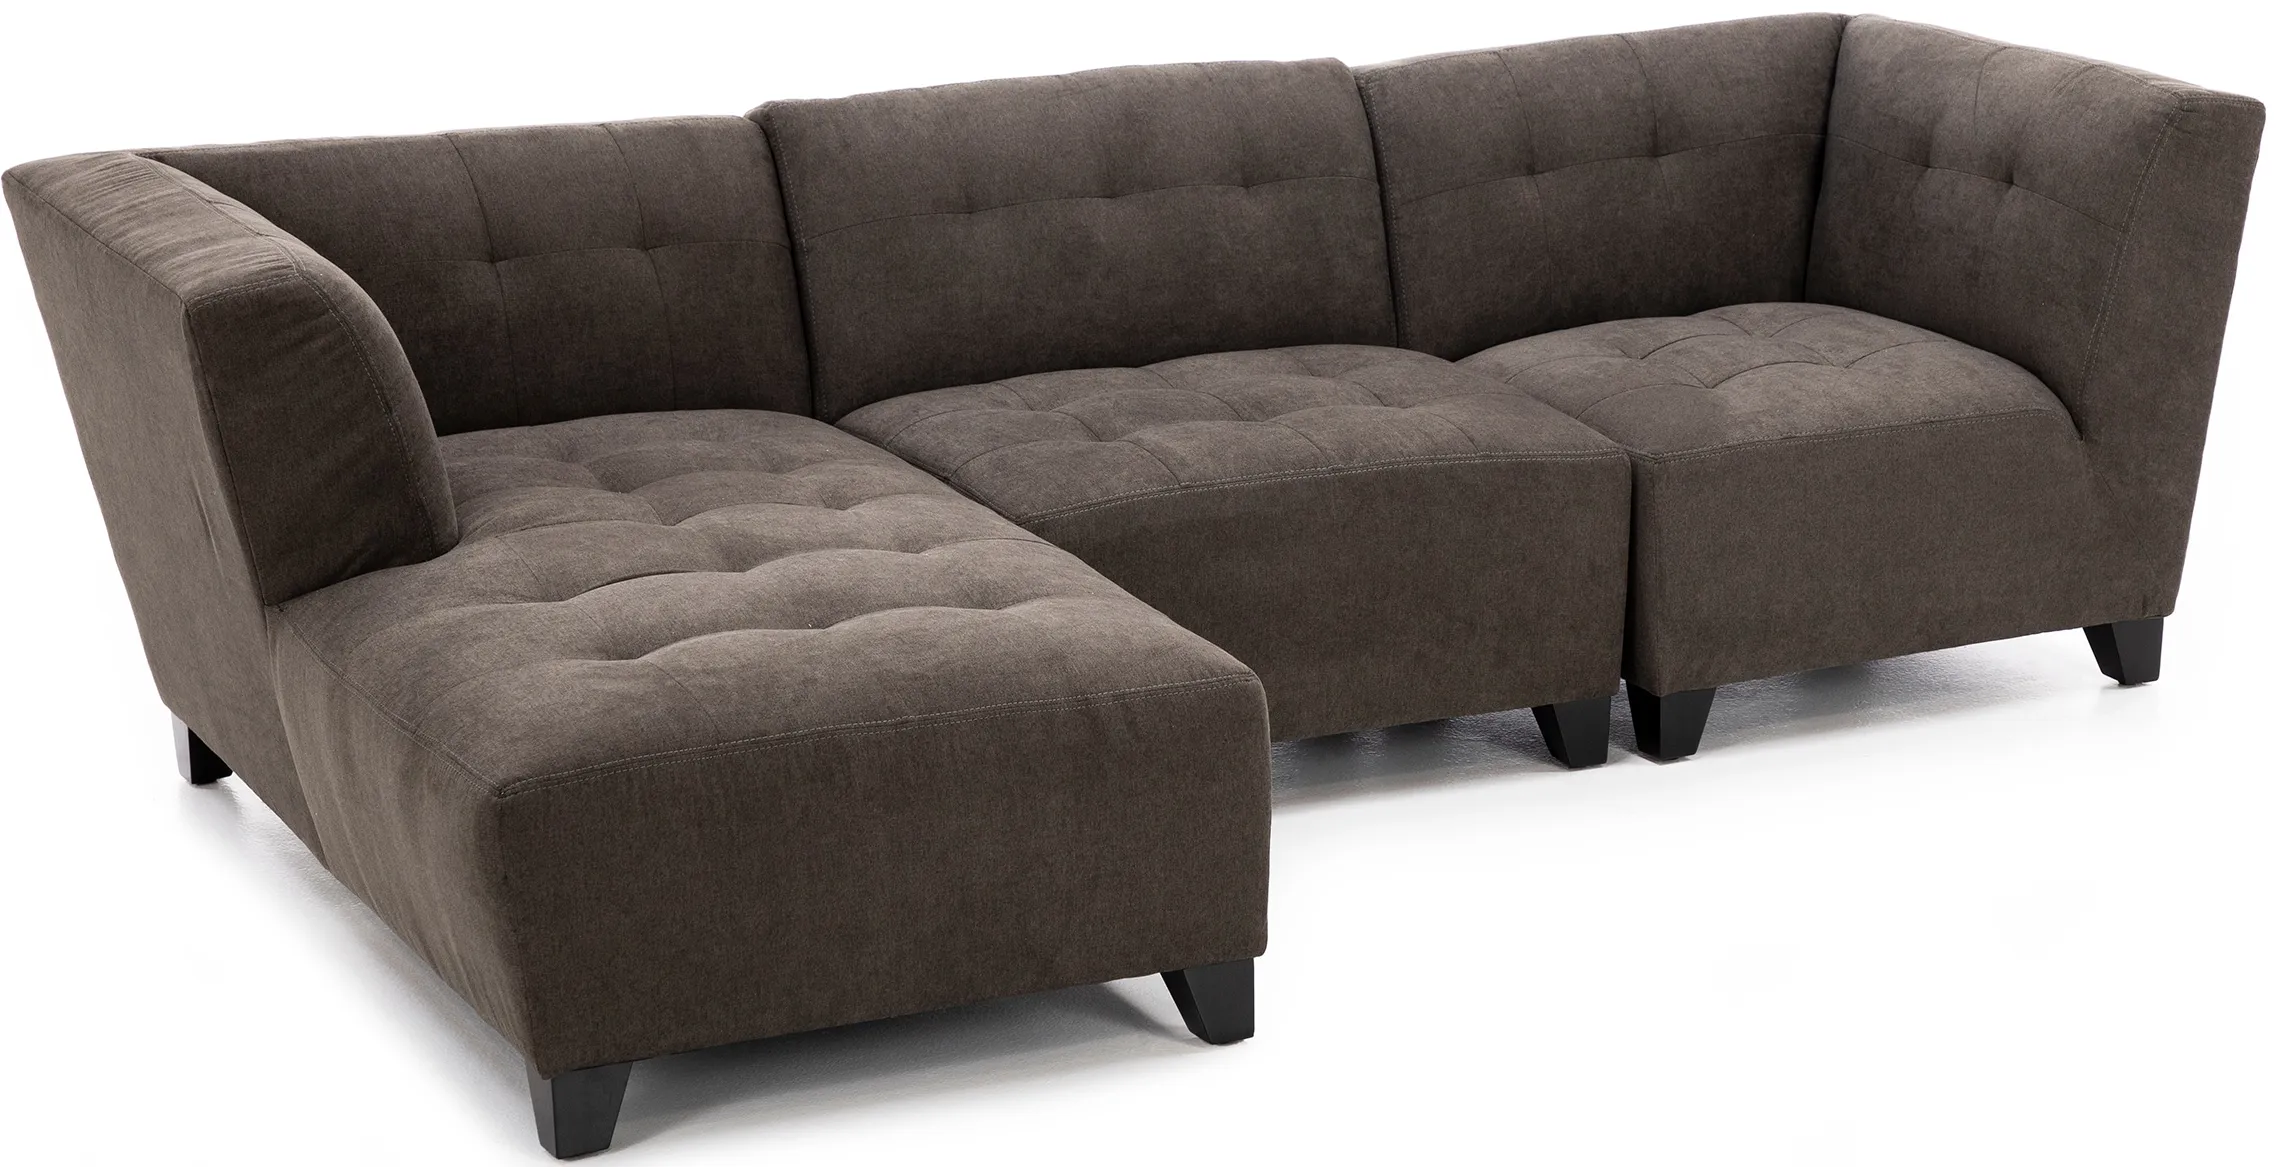 Belaire 3-Pc. Chaise Sofa